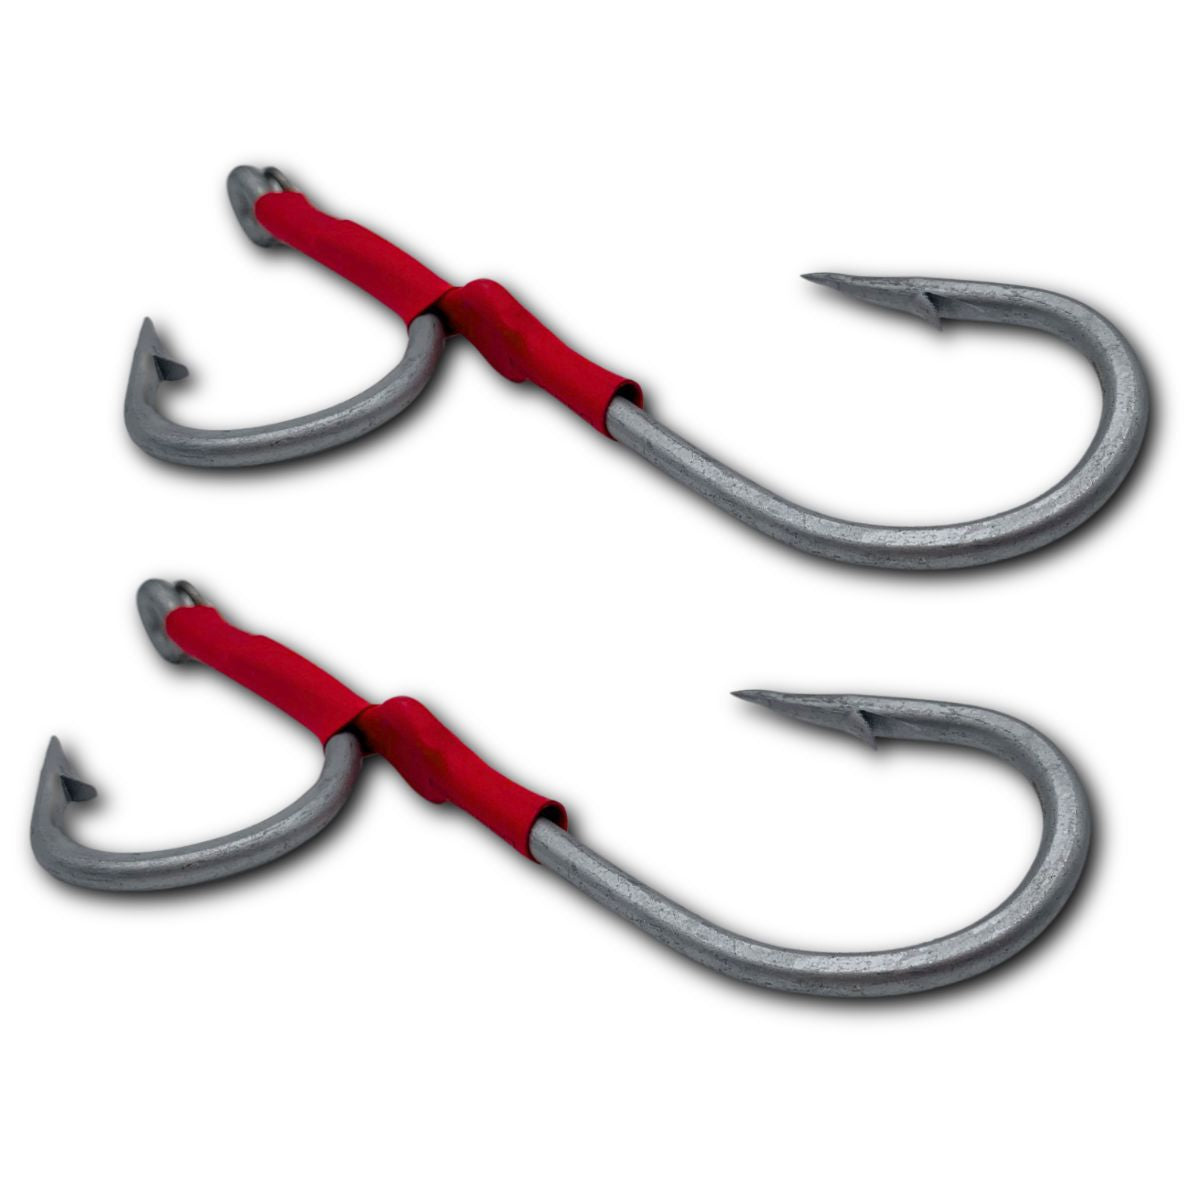 Kamikaze - 2 Game Lure Assist Hook 12-0 Rigs Twin Pack